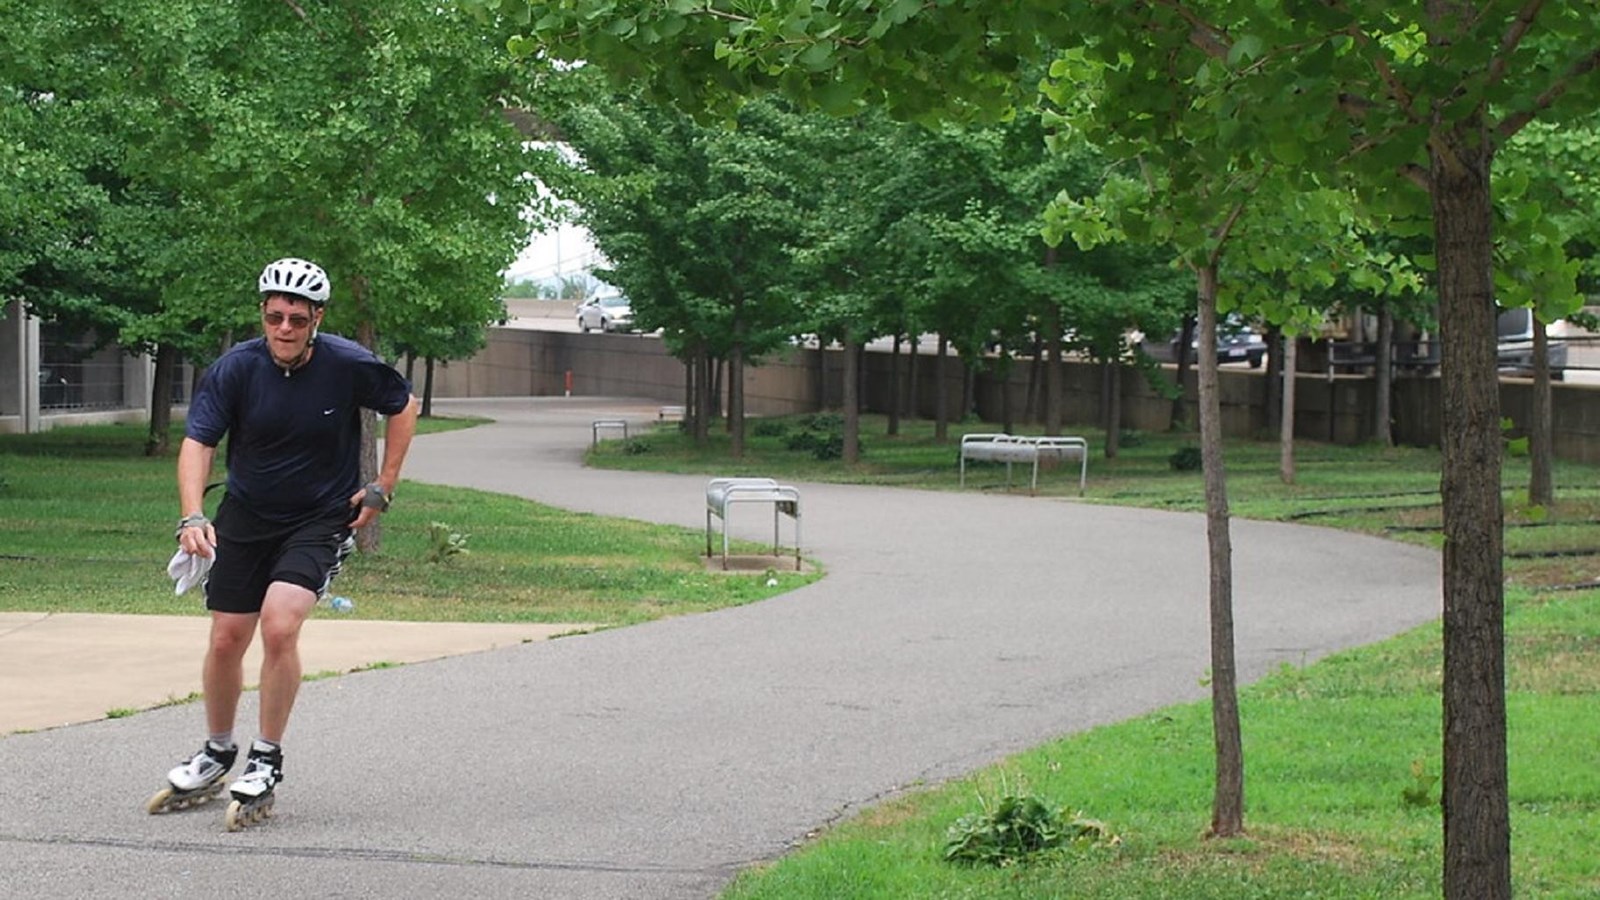 A man rollerblading on a paved trail through a tree-dotted city park